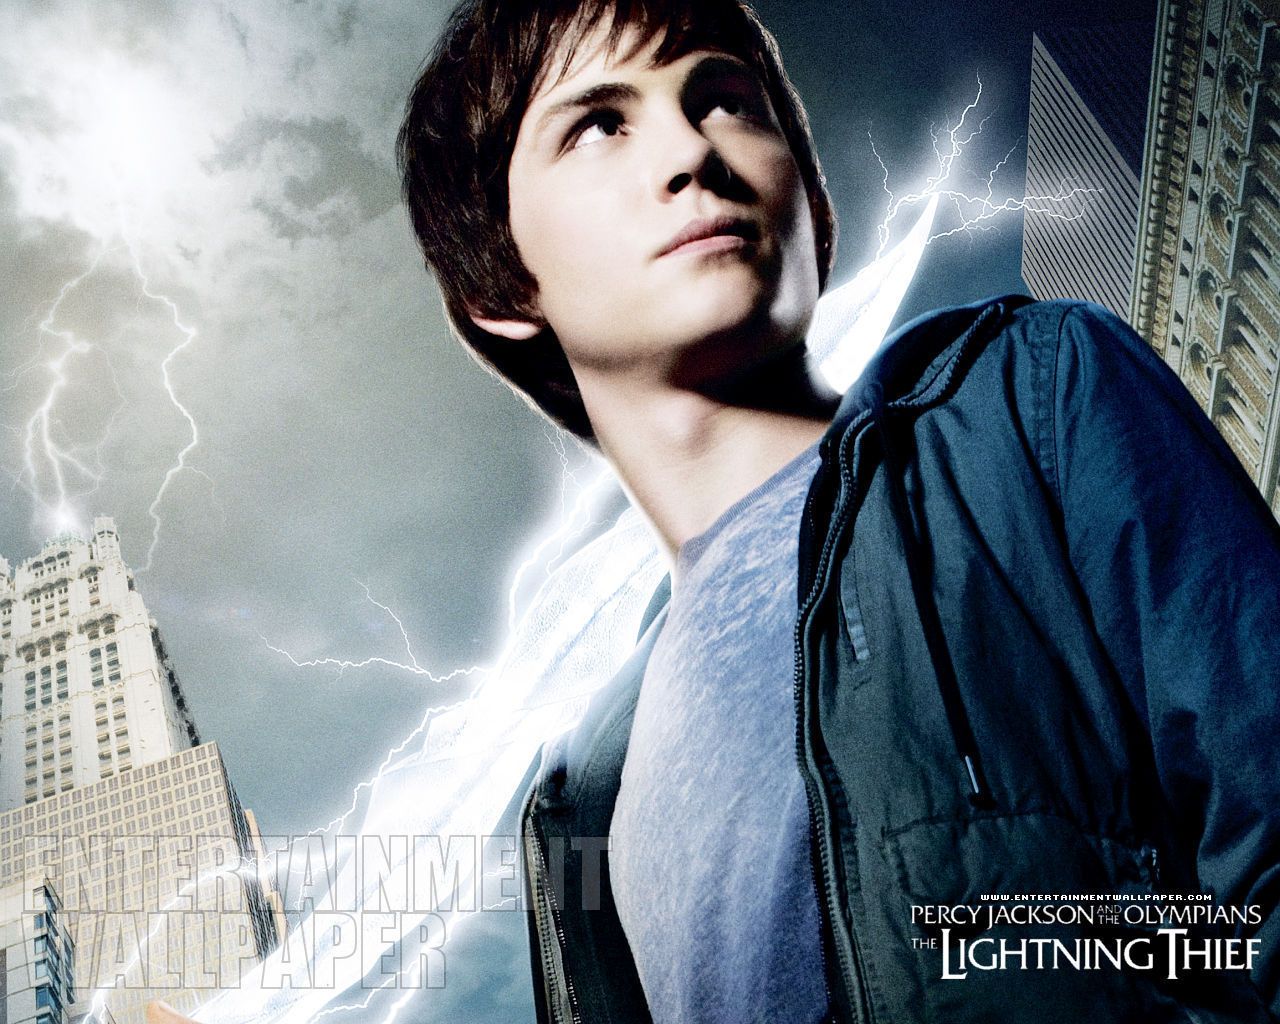 Percy Jackson From The Lightning Thief - HD Wallpaper 